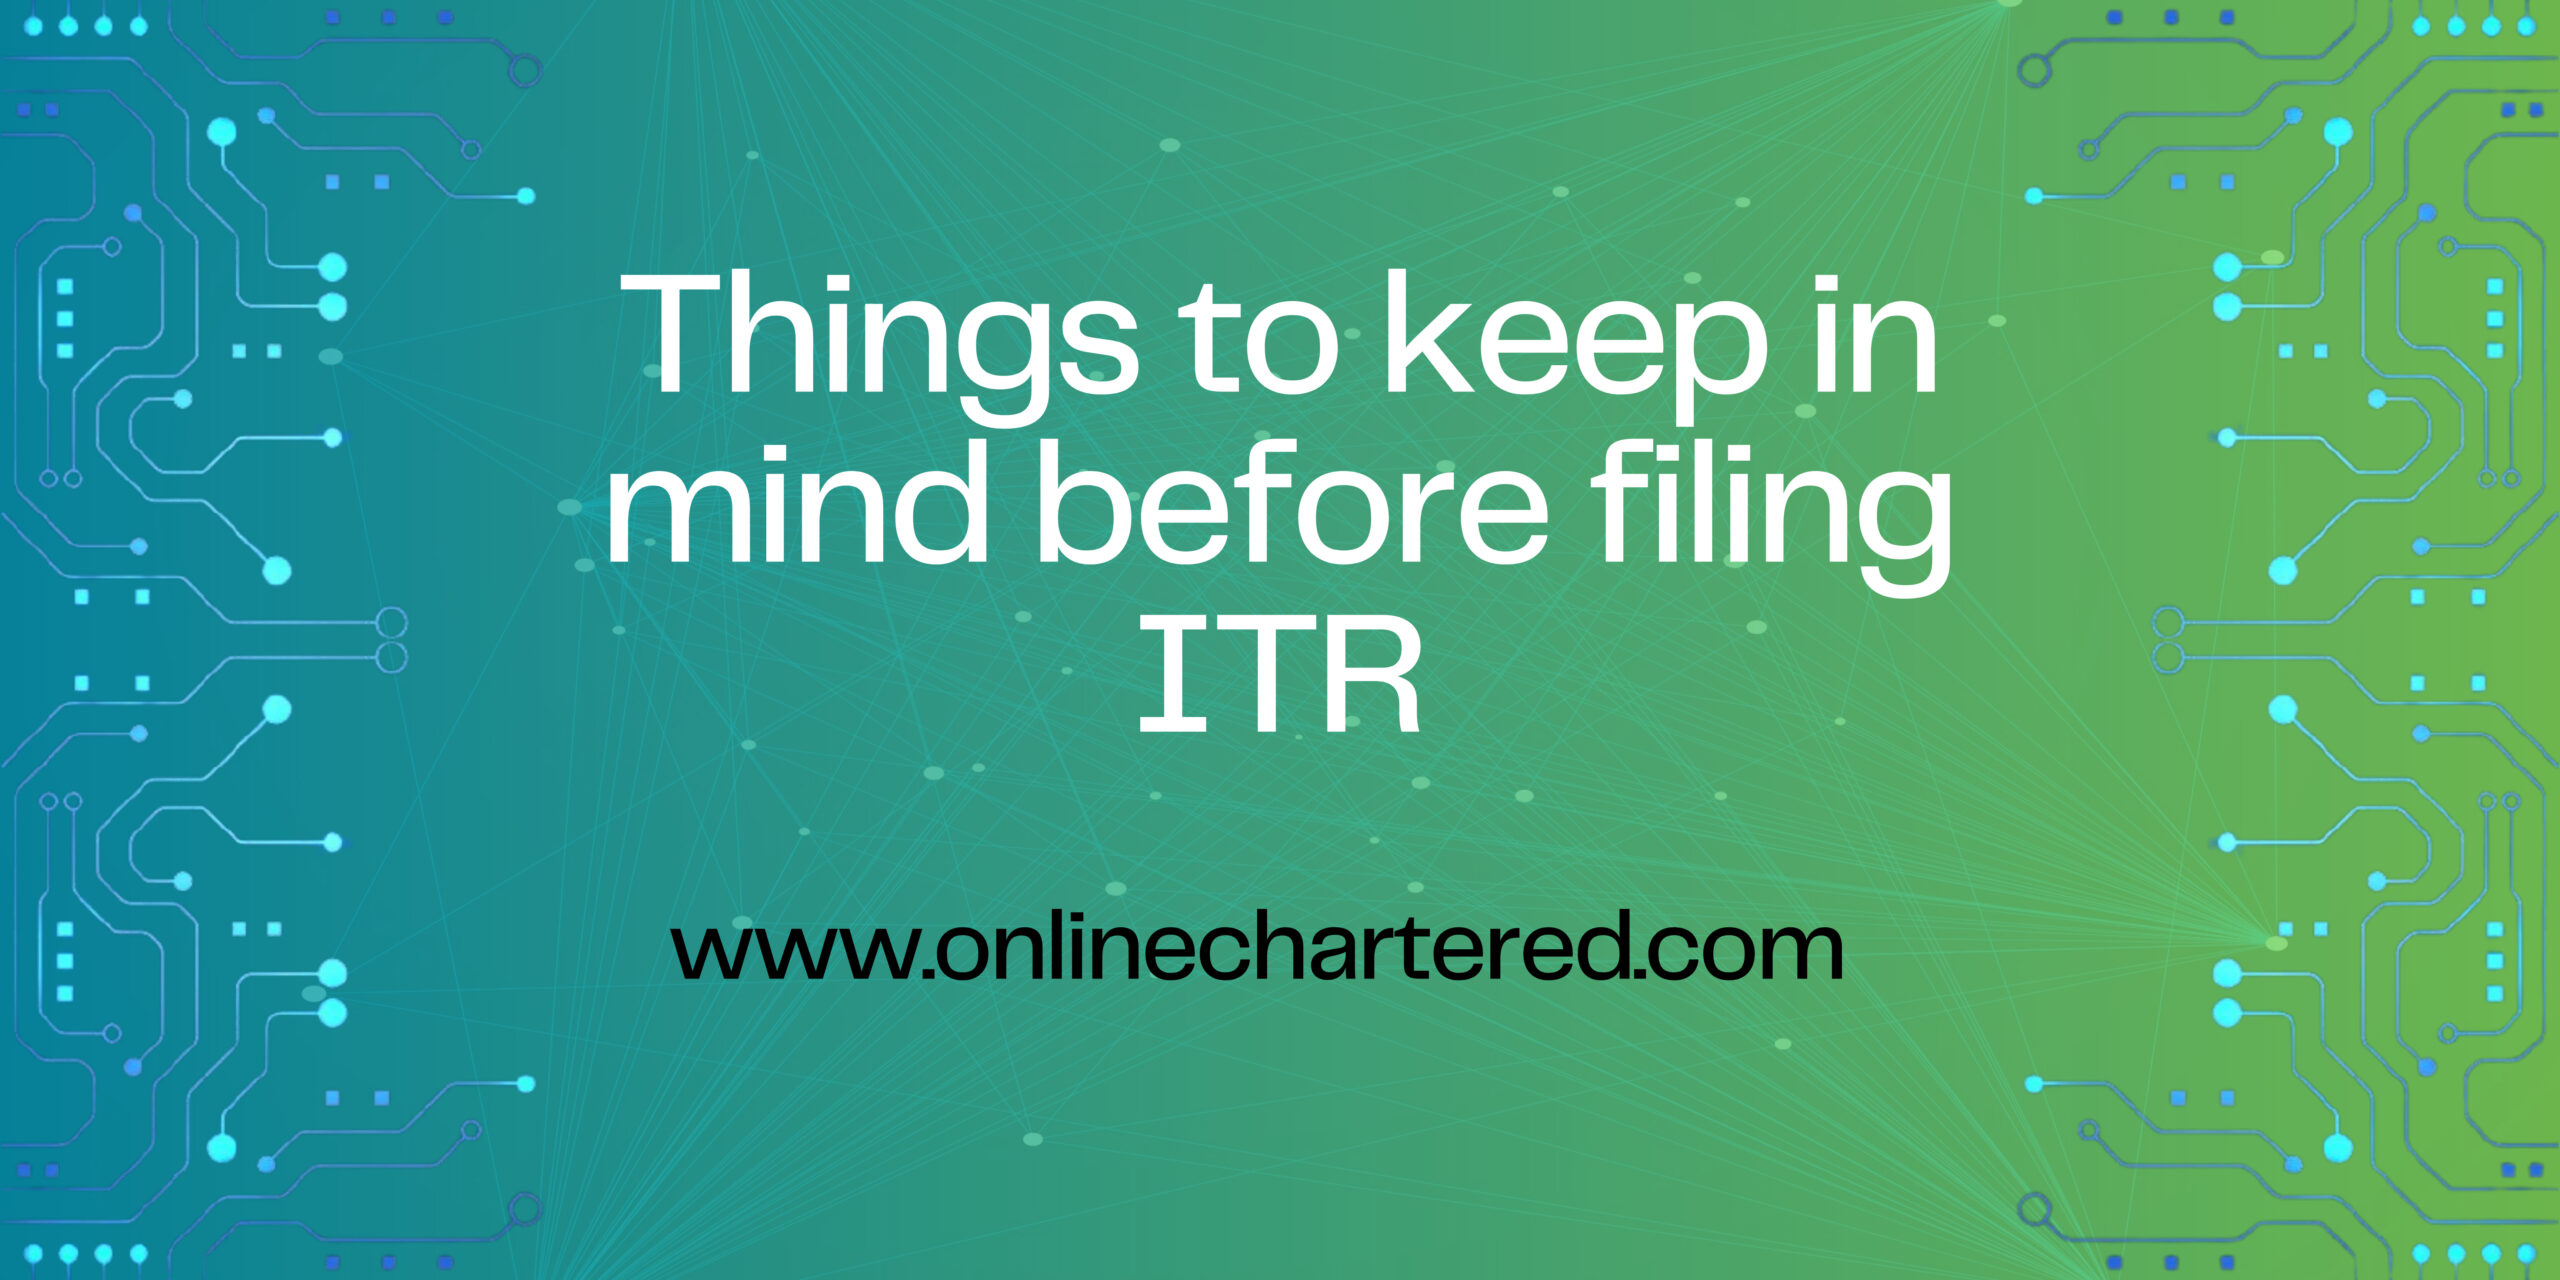 Things to keep in mind before filing ITR